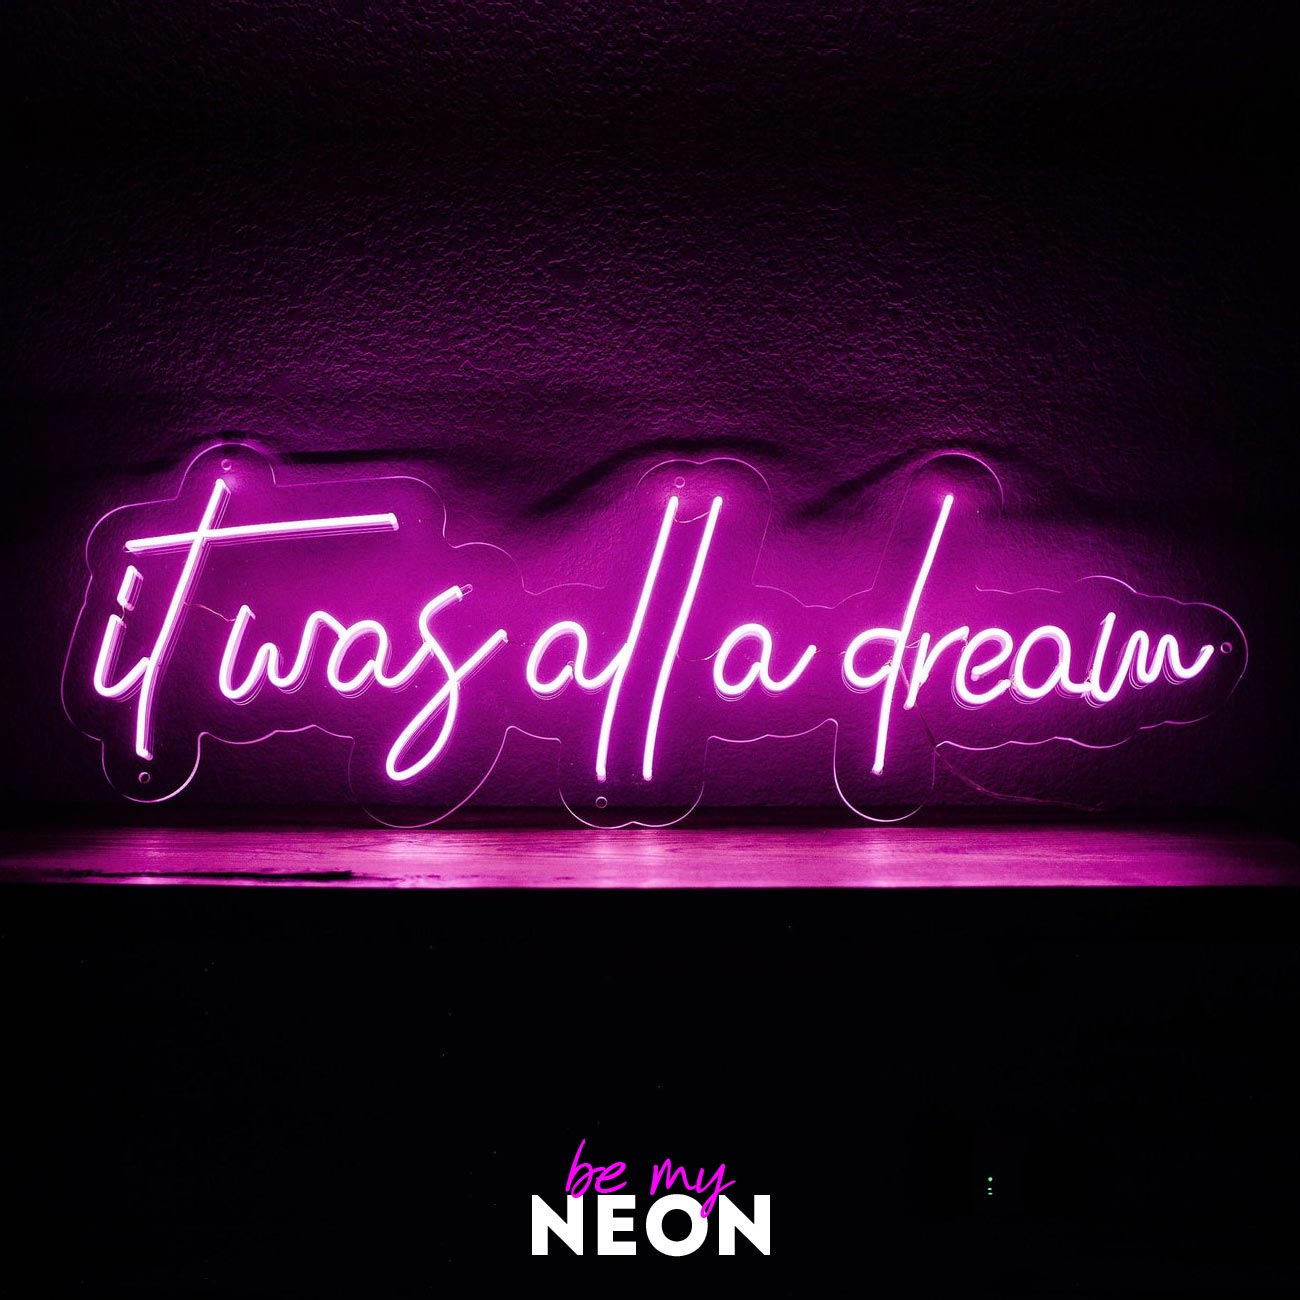 "It Was All a Dream" LED Neonschild